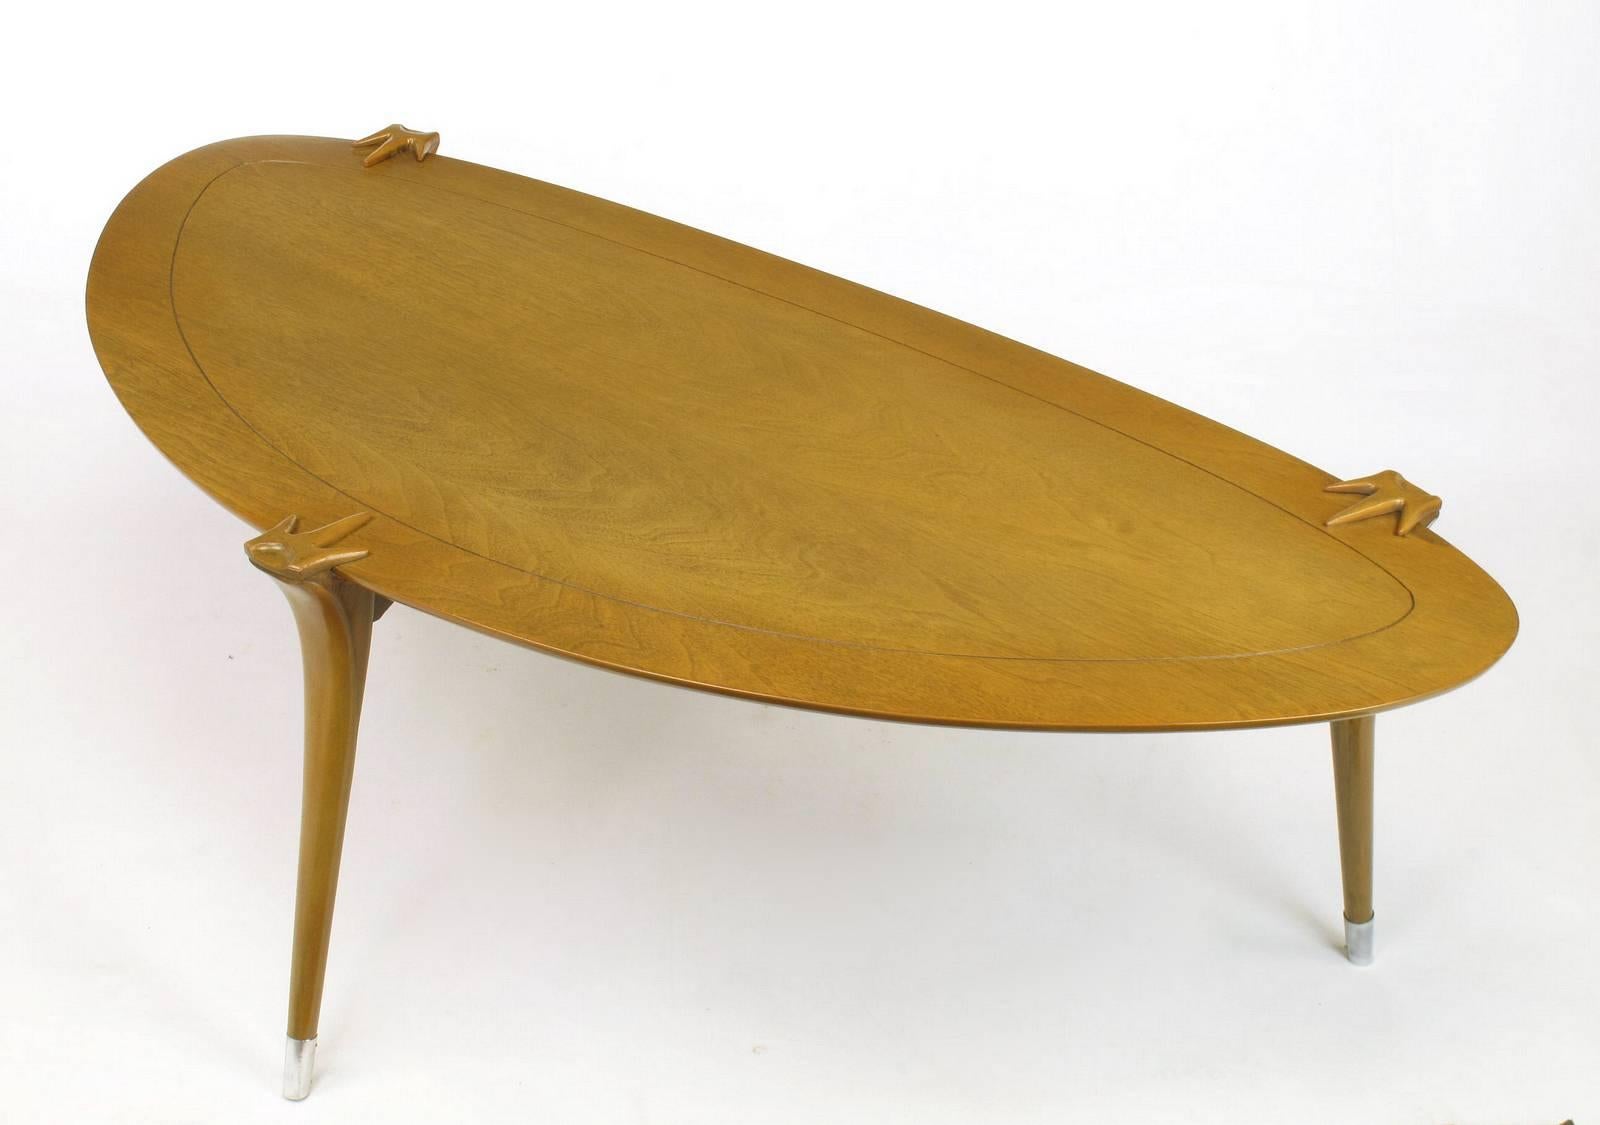 Bleached walnut triangular shaped coffee table, circa 1950s. Talon style cuffed legs with polished aluminum sabots and incised border top. Uncommon in shape and detail.